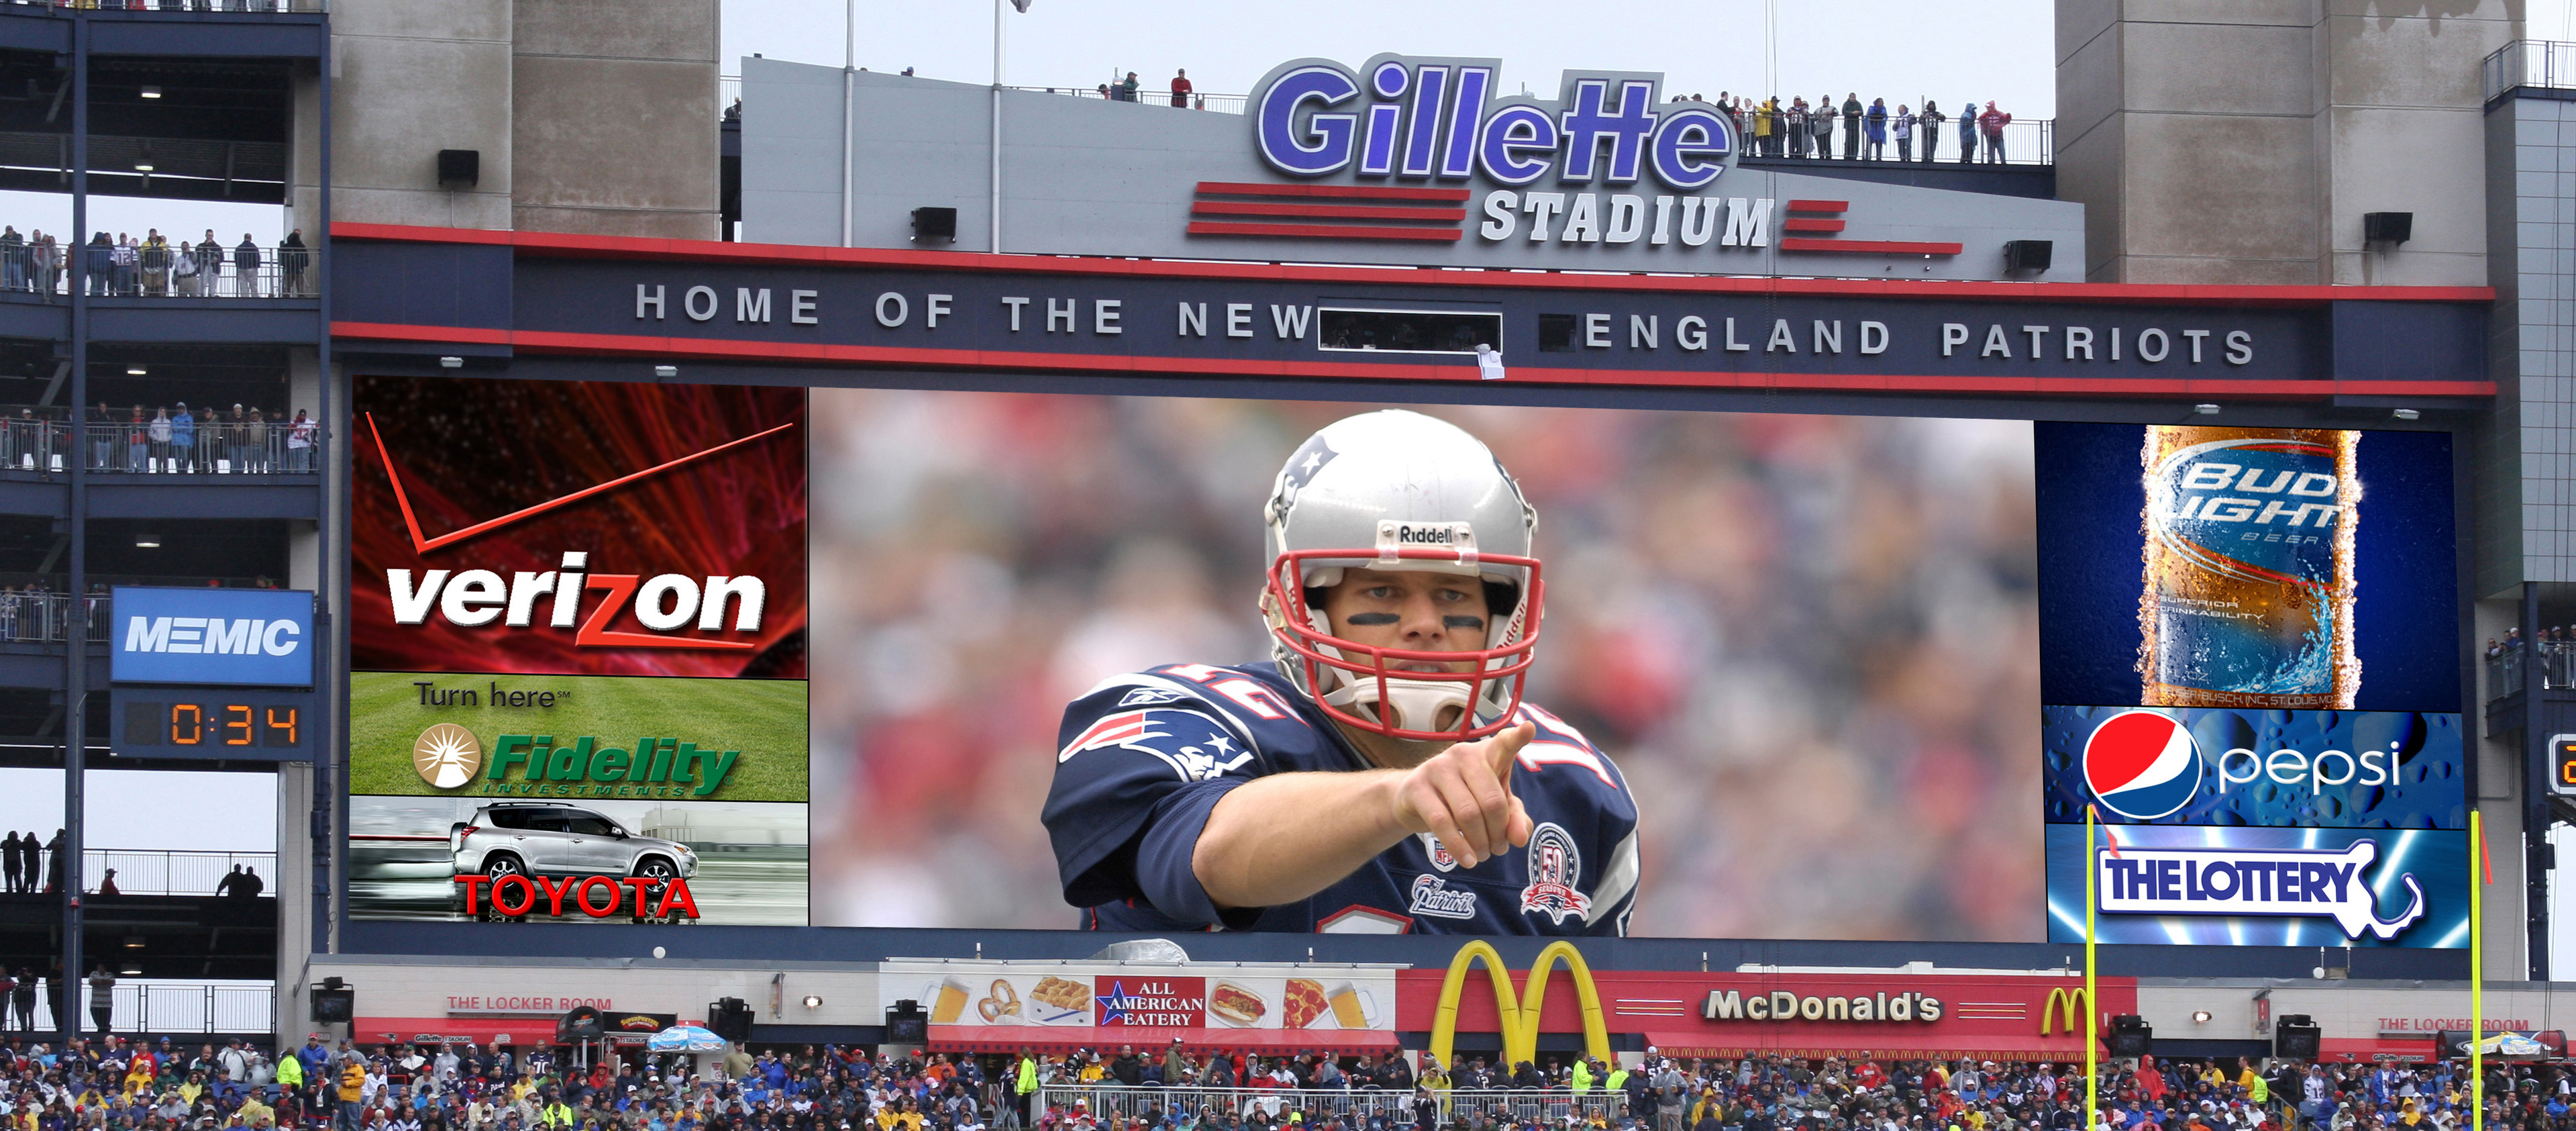 Daktronics to Provide High Definition Video Screens at Gillette Stadium